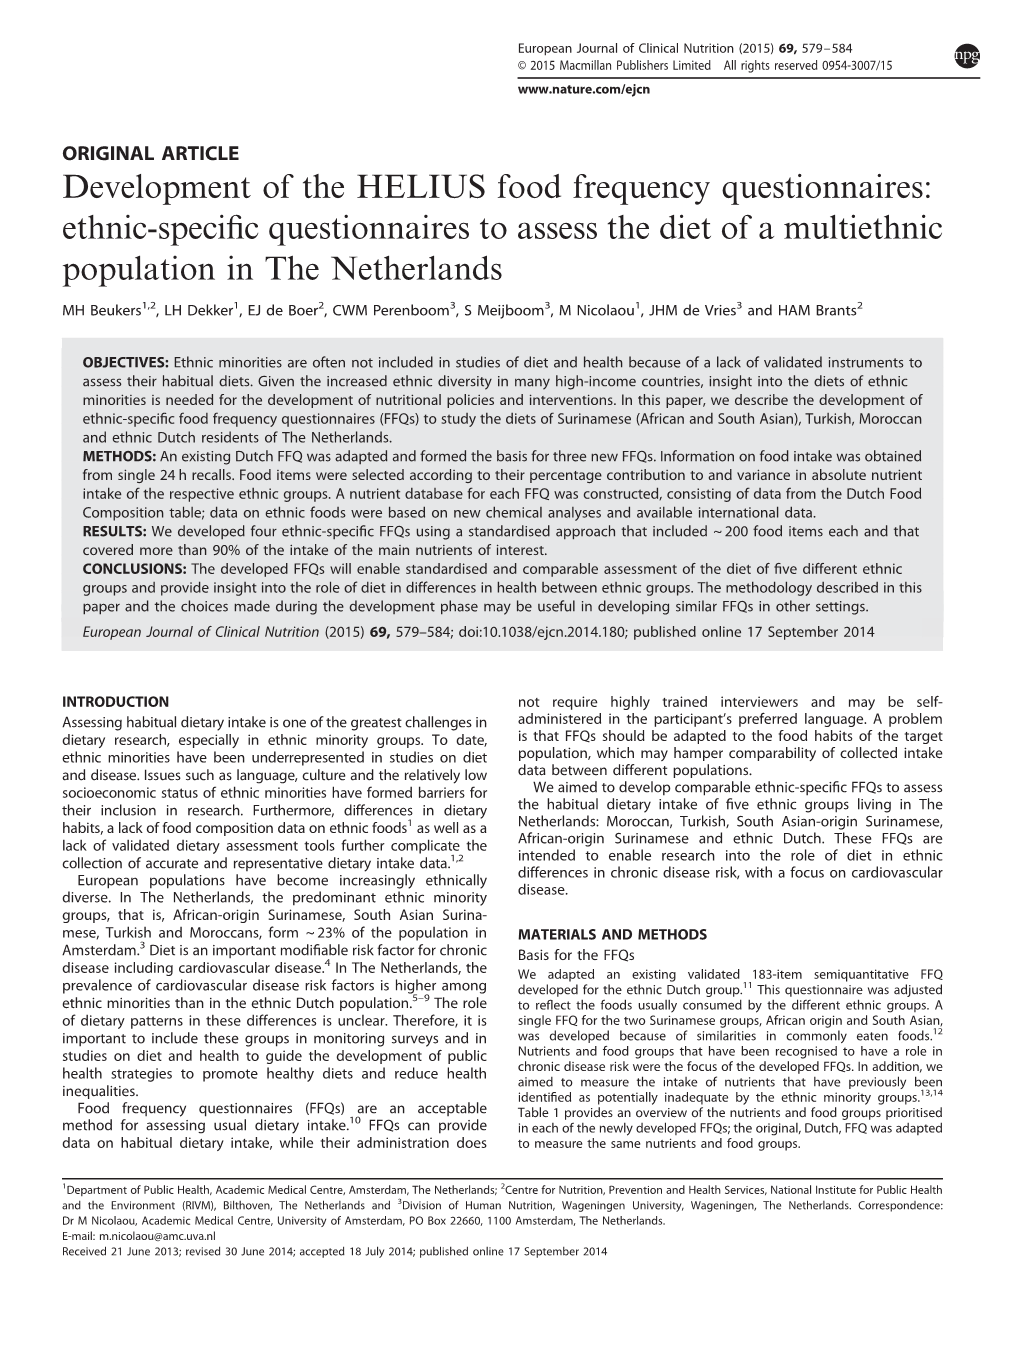 Development of the HELIUS Food Frequency Questionnaires: Ethnic-Speciﬁc Questionnaires to Assess the Diet of a Multiethnic Population in the Netherlands